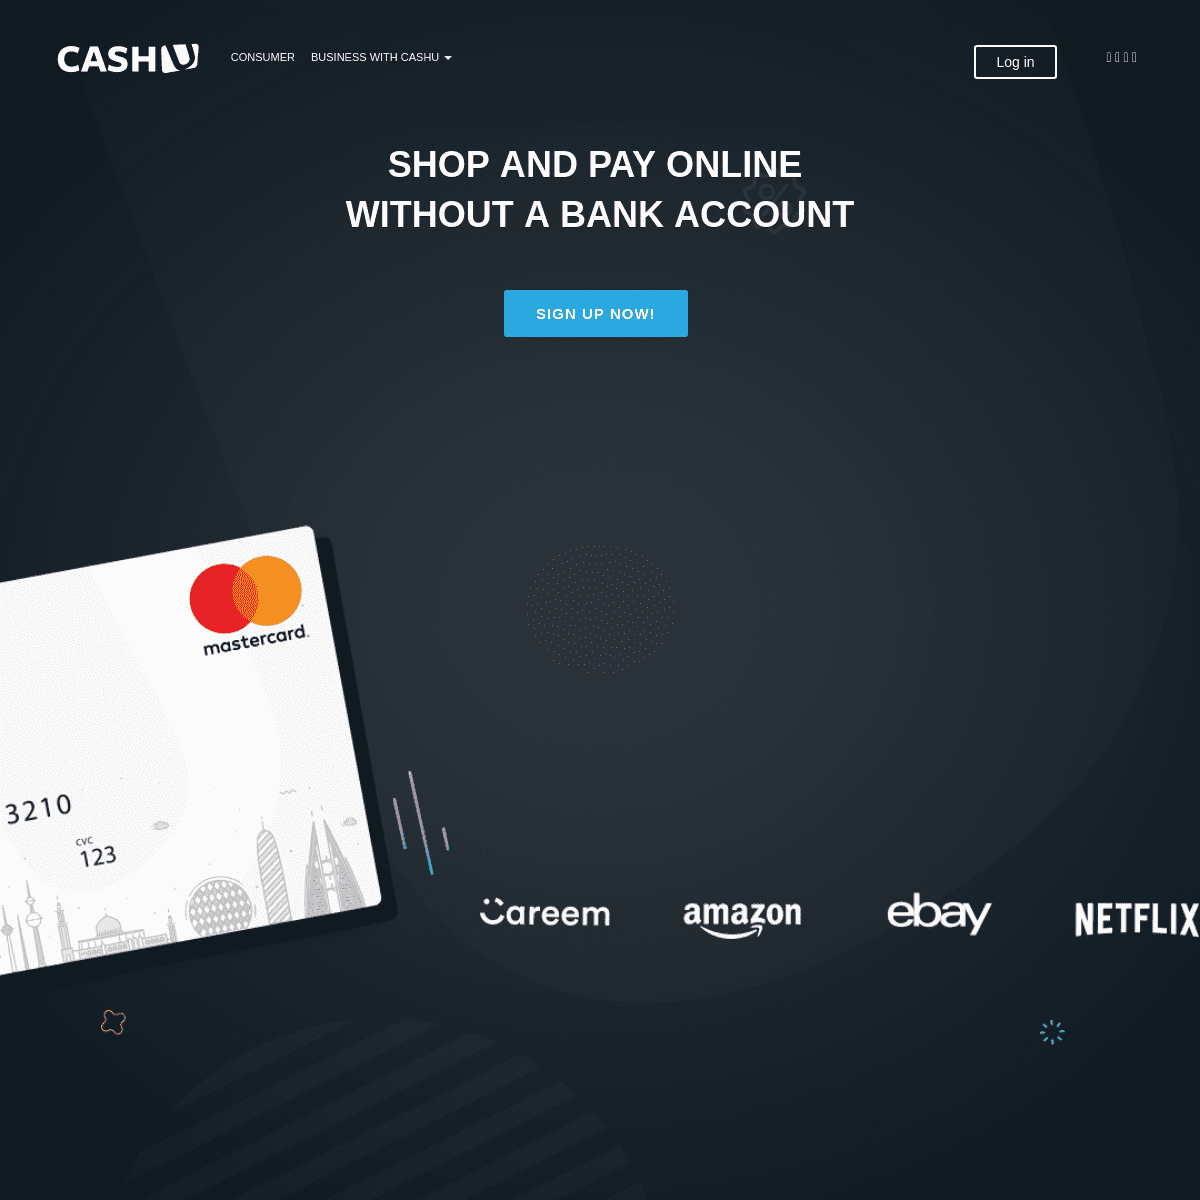 Pay Online Easily and Securely without Credit Card - CASHU